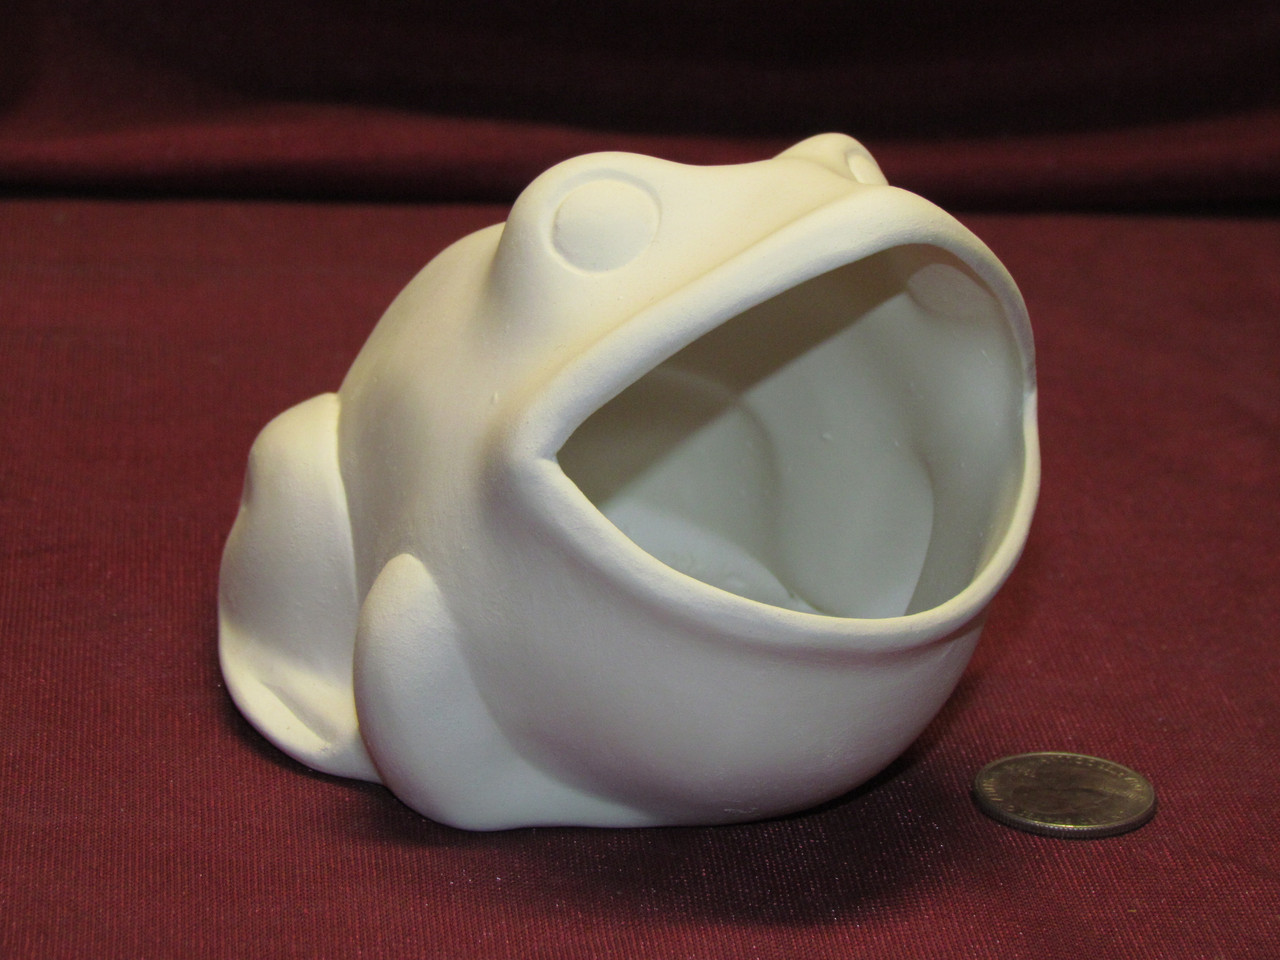 Ceramic Bisque U-Paint Small Frog Scrubby Holder, Soap Dish or Catch All  Ready to Paint Unpainted - Fat Cat Ceramics